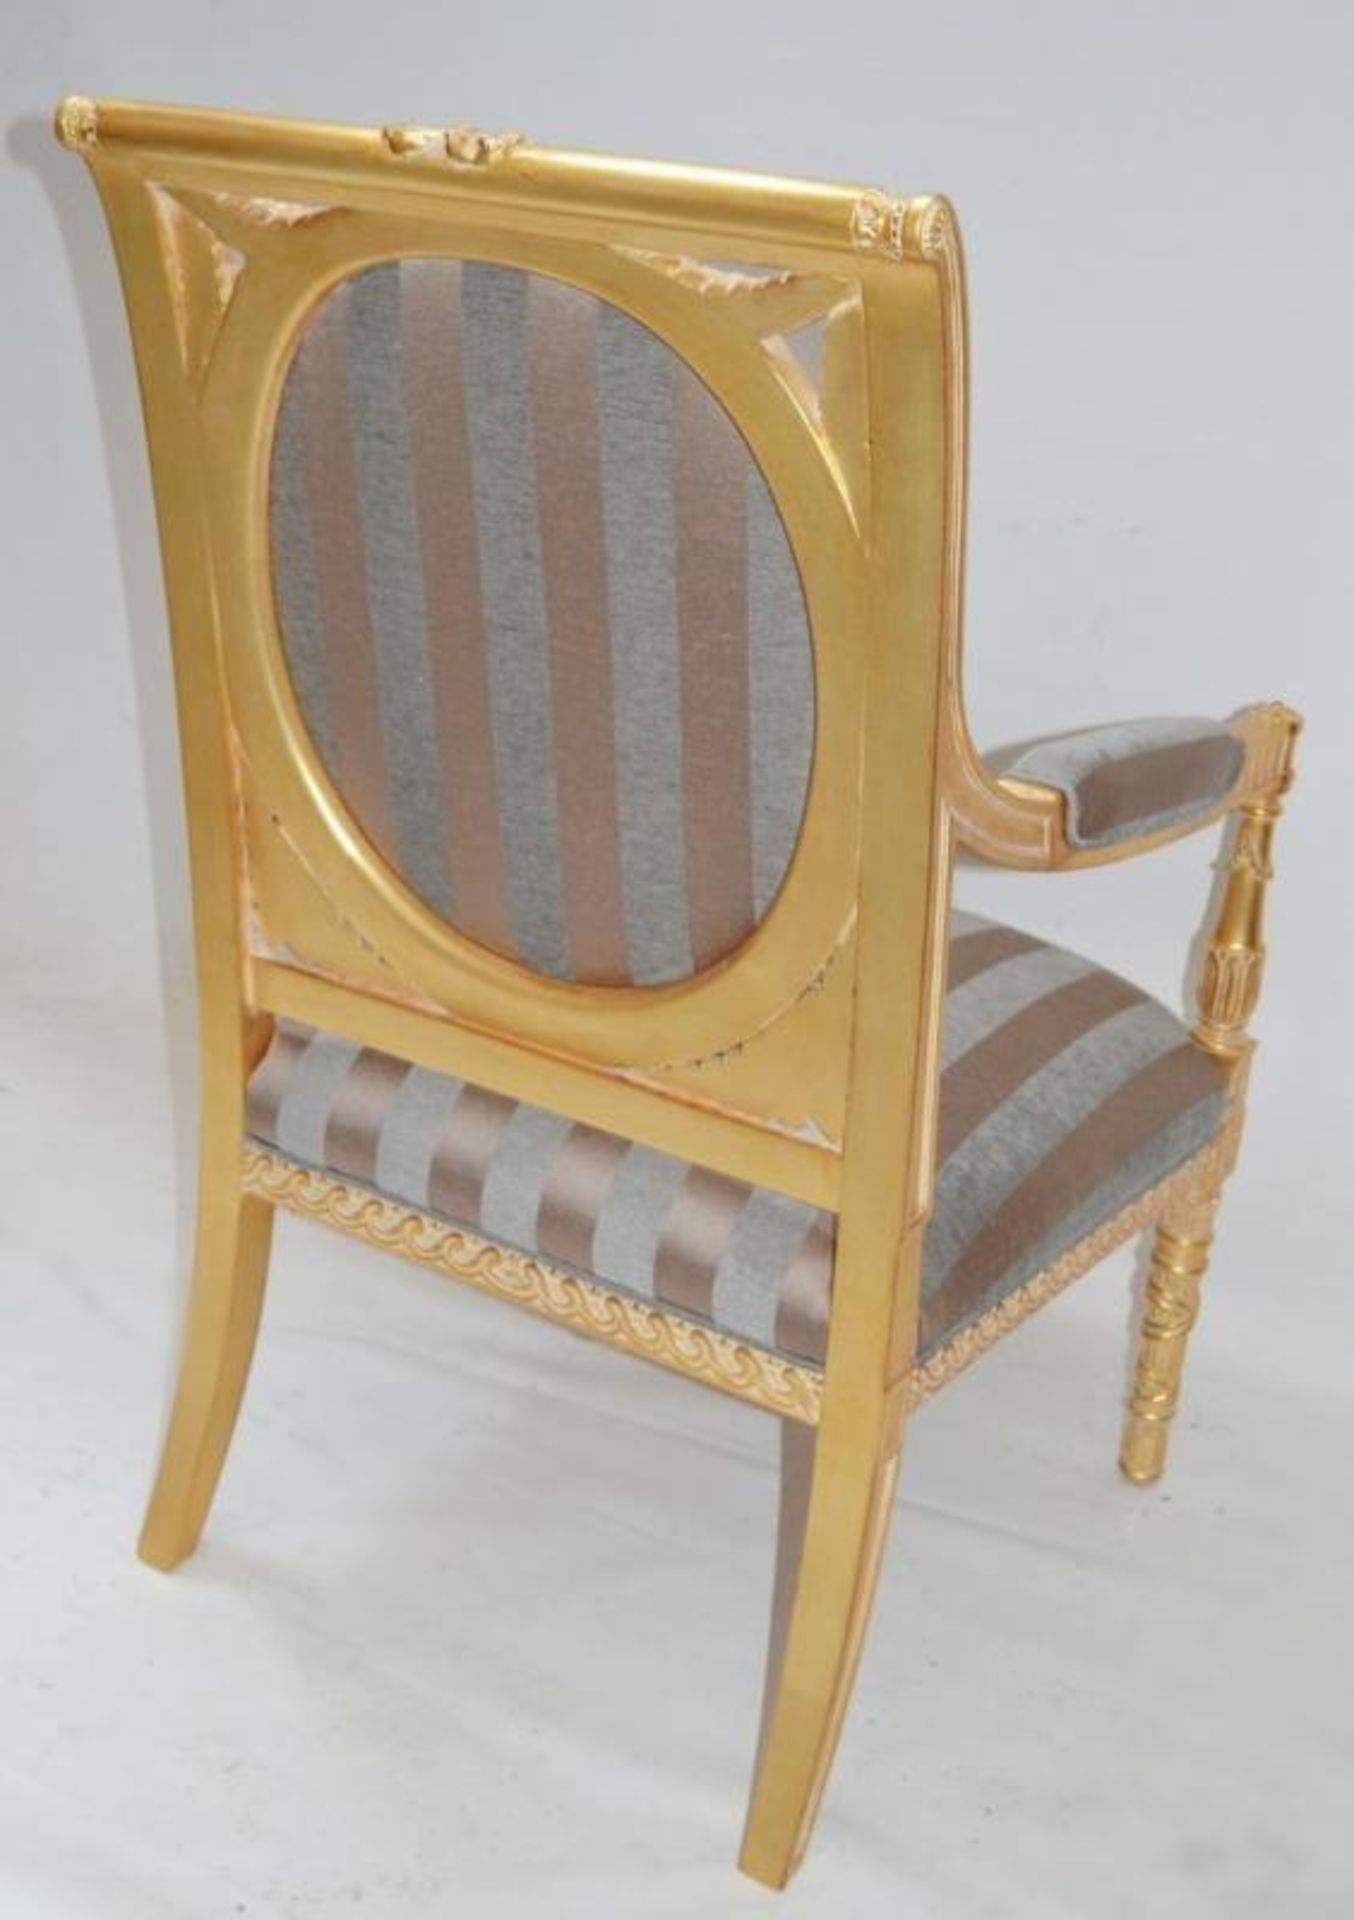 1 x DURESTA Flavia Chair - Features A Hand-Carved Hard Wood Frame With Hand-Stitched Coil Sprung Sea - Image 3 of 16